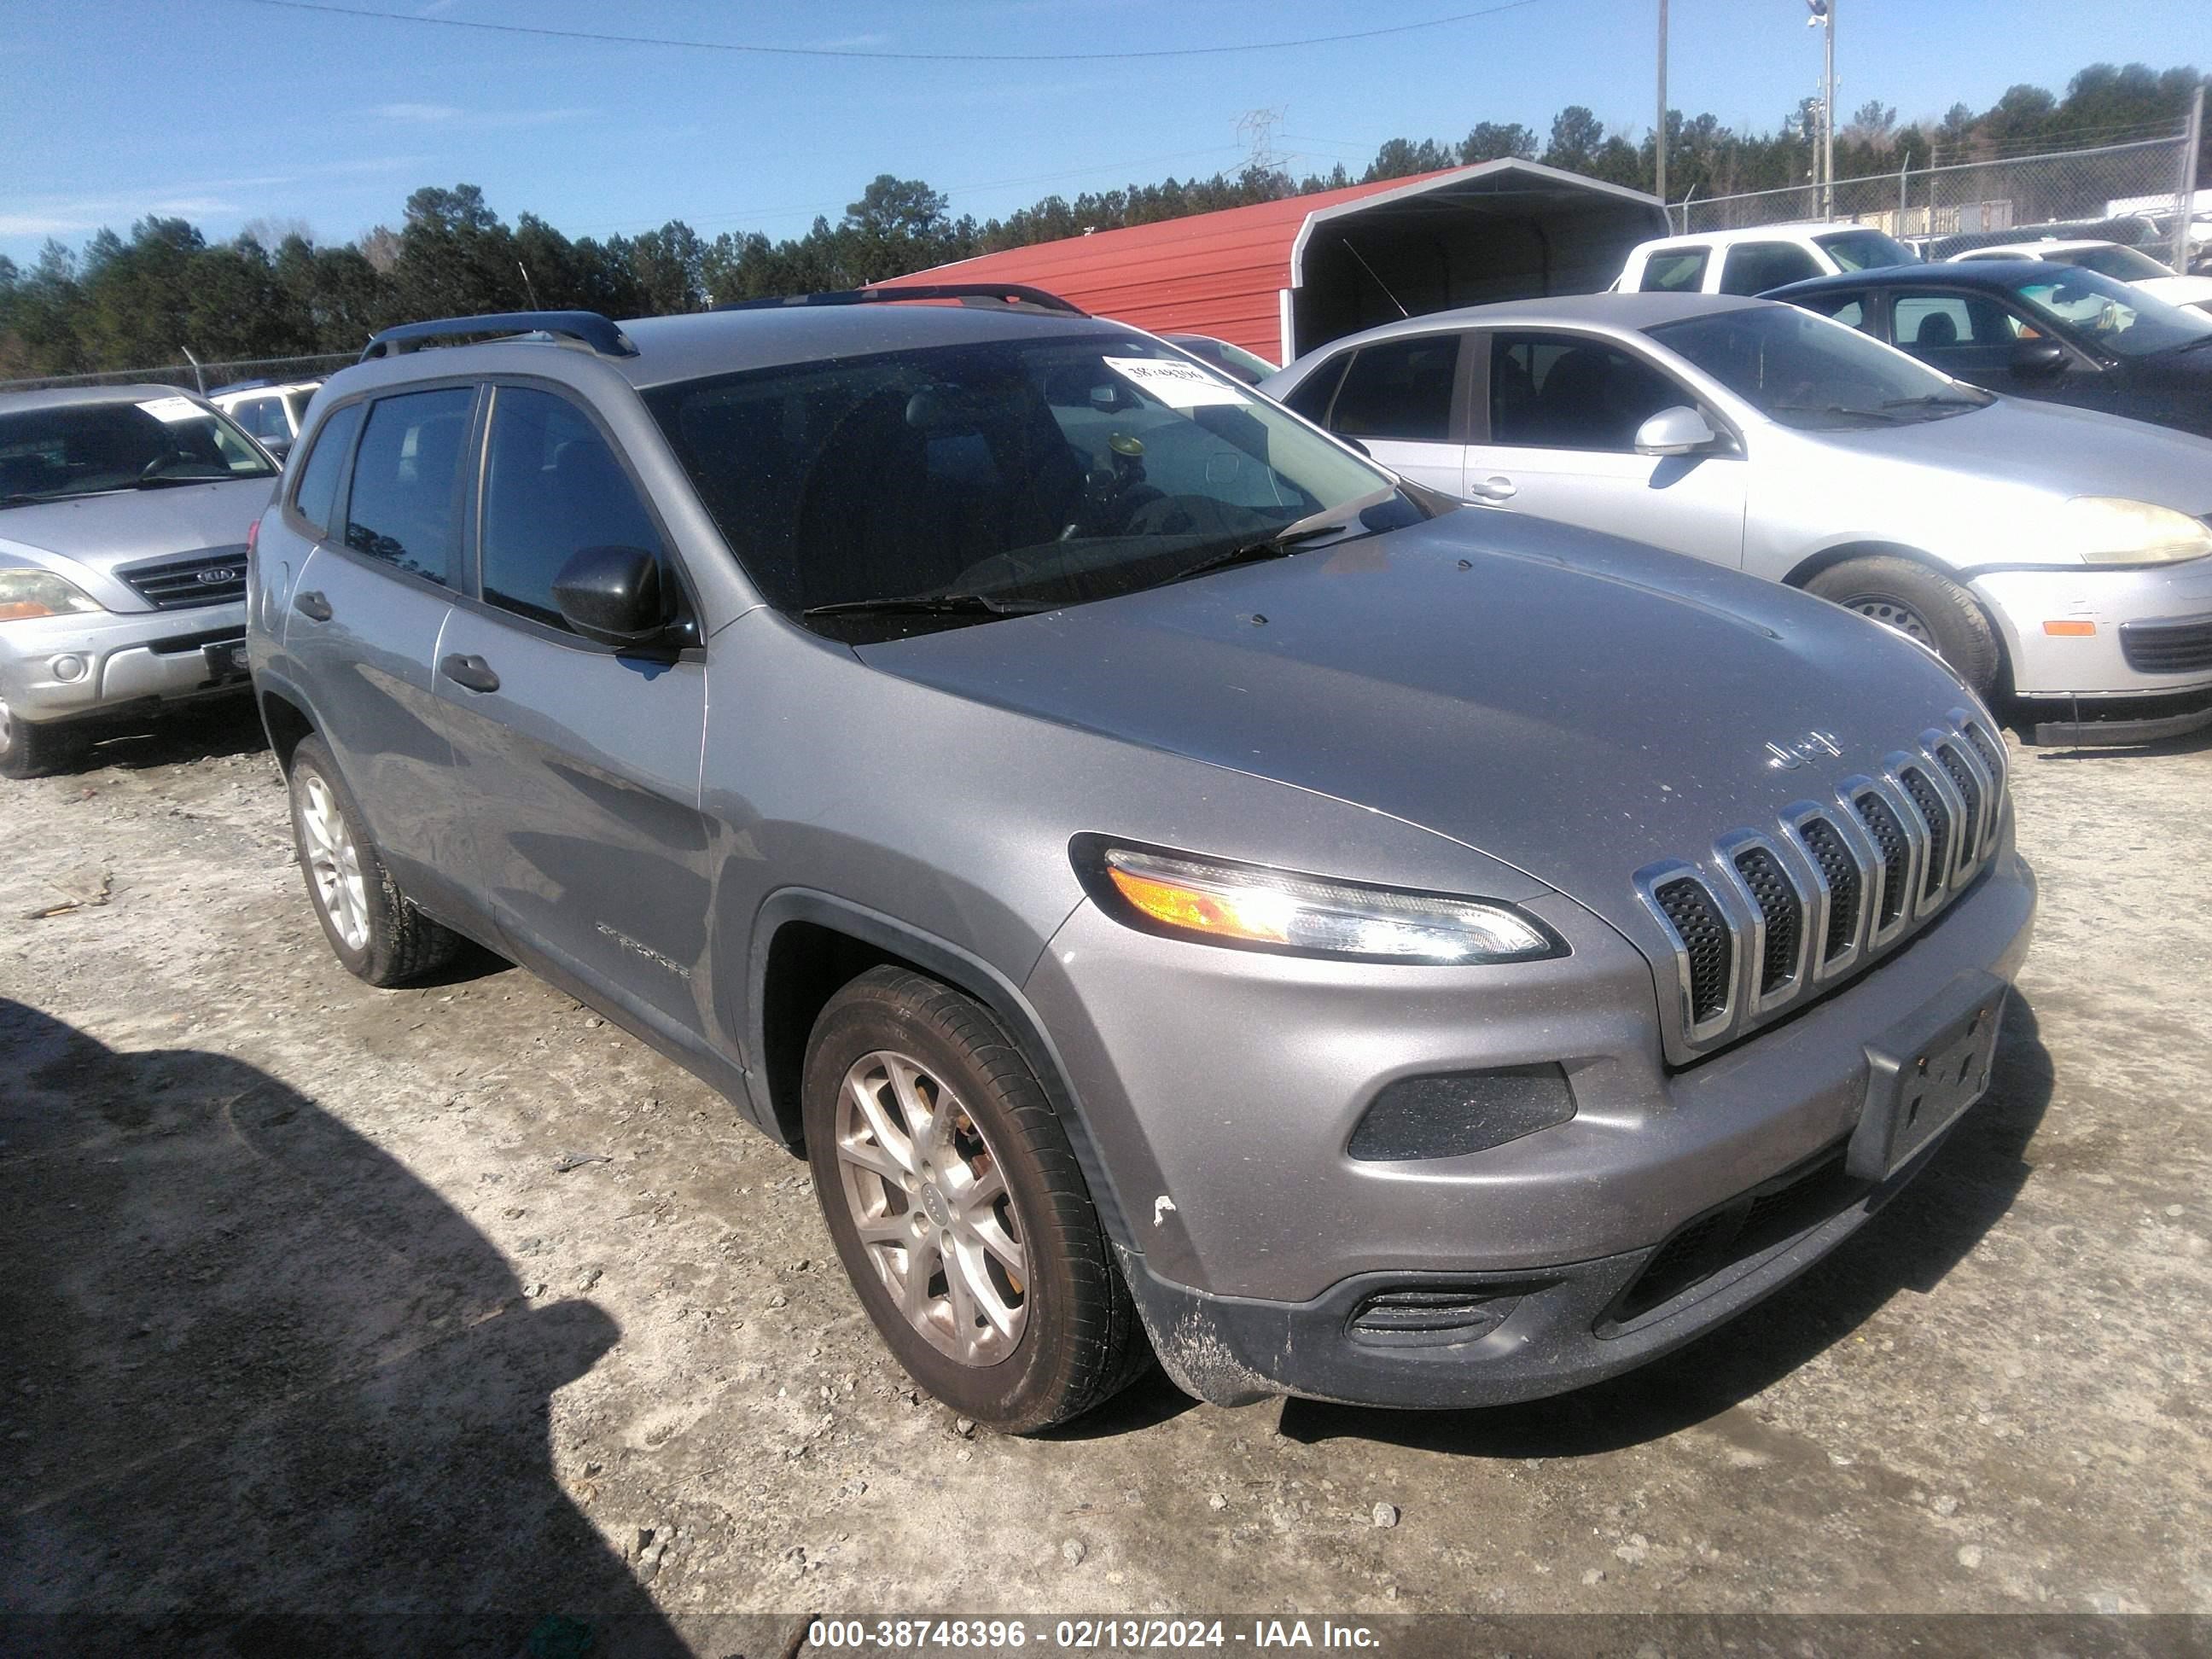 vin: 1C4PJLAB0FW760559 1C4PJLAB0FW760559 2015 jeep cherokee 2400 for Sale in 31326, 348 Commerce Dr, Rincon, Georgia, USA